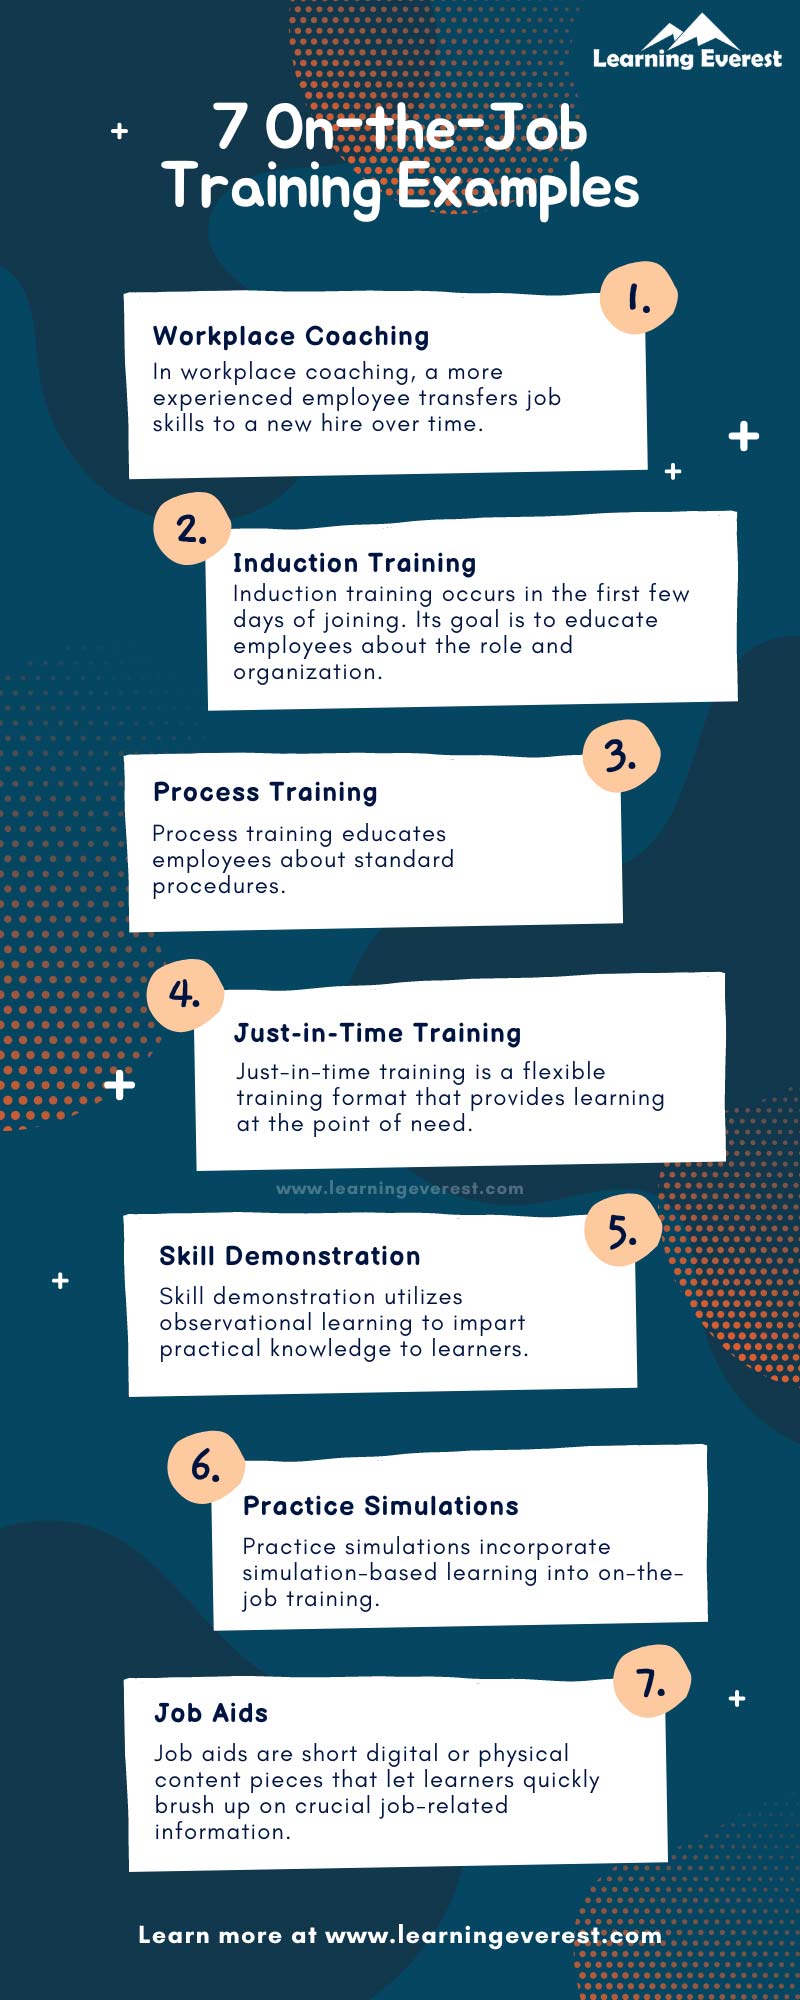 On-the-Job Training Examples - Infographic